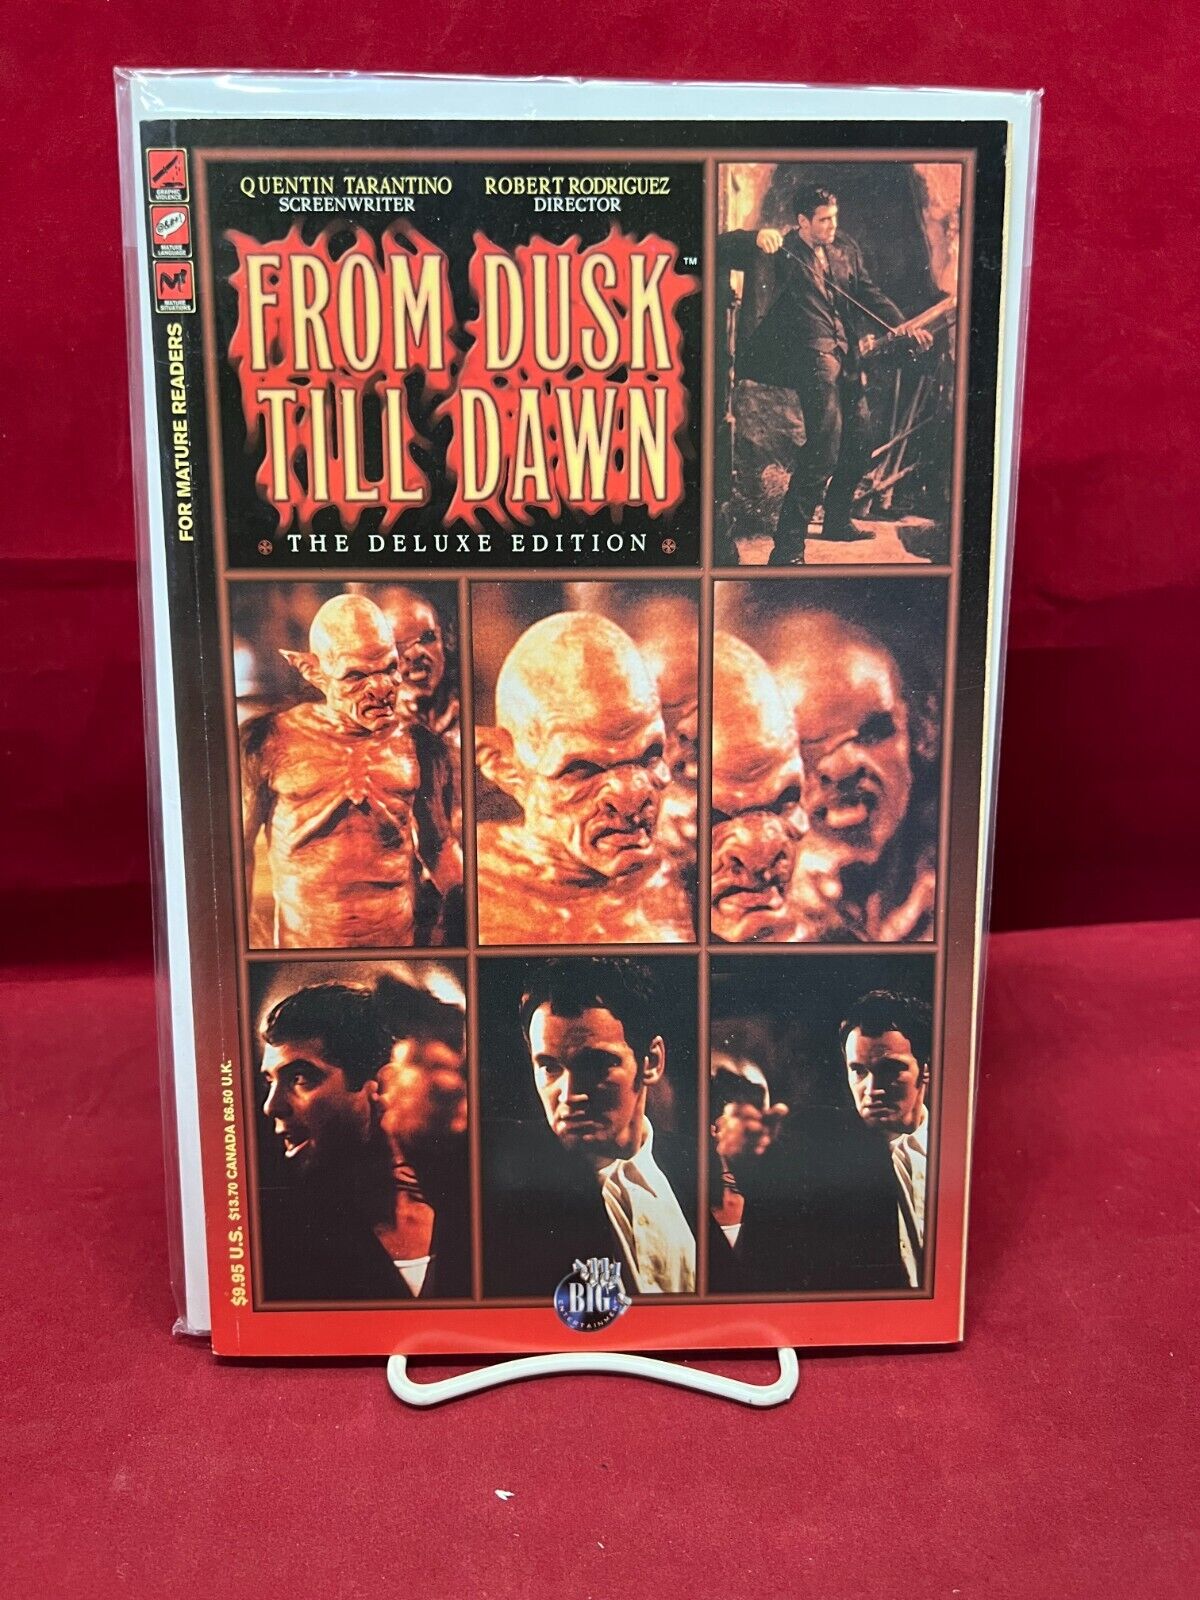 From Dusk Till Dawn The Deluxe Edition Comic Book Big Entertainment VF 1996